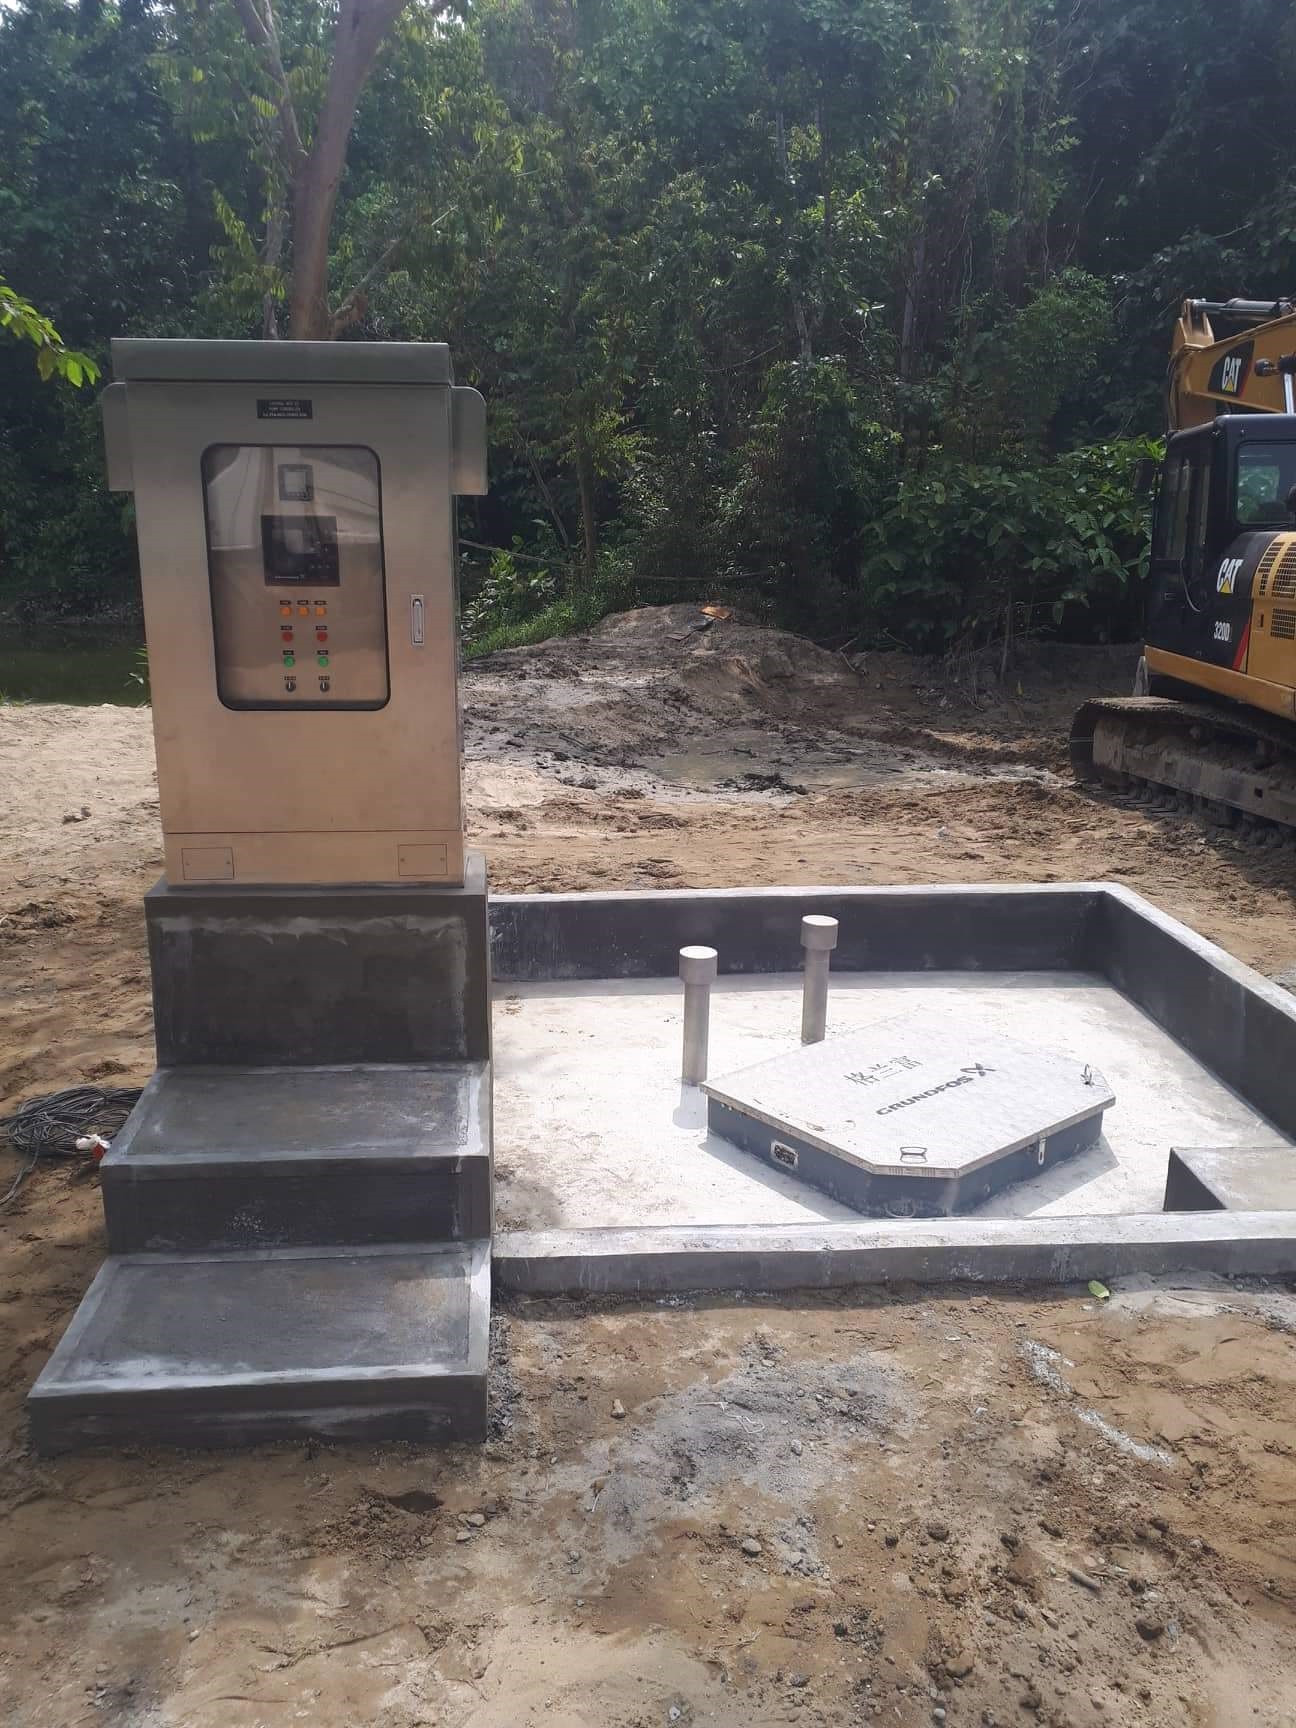 A Grundfos PPS installed in Lio, El Nido, Palawan in the Philippines.